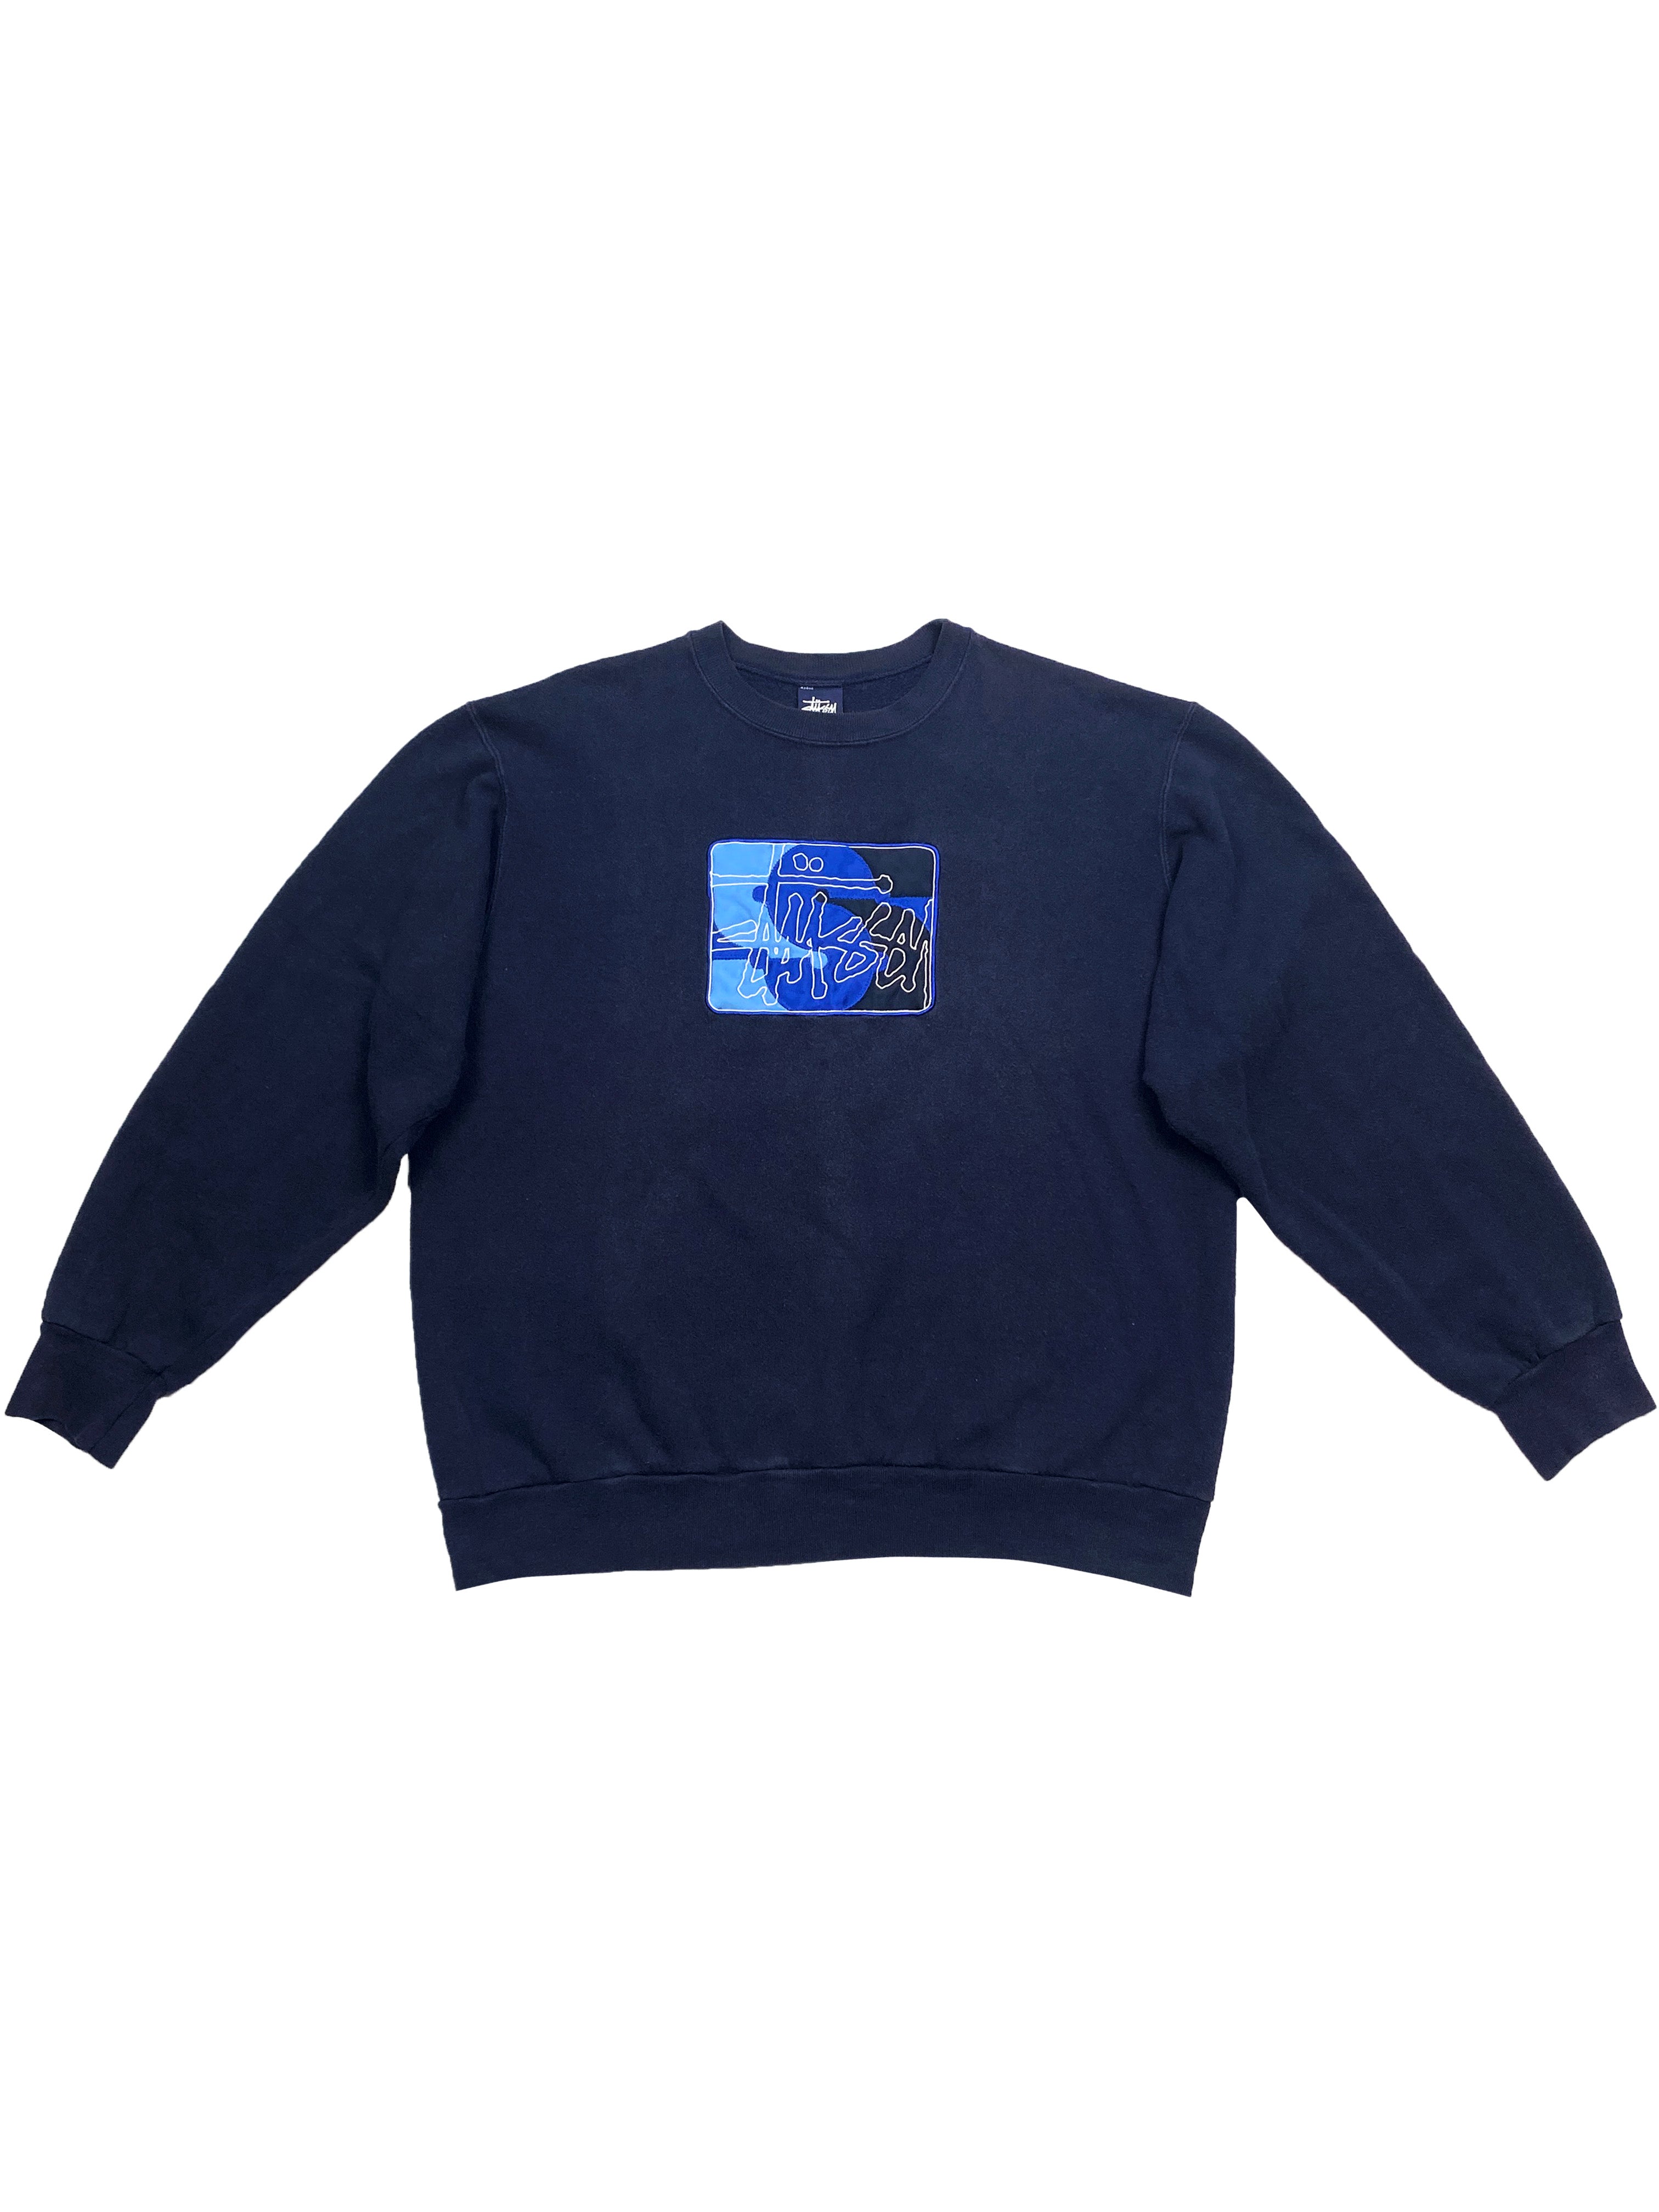 Stussy Navy Spell Out Sweatshirt 90's